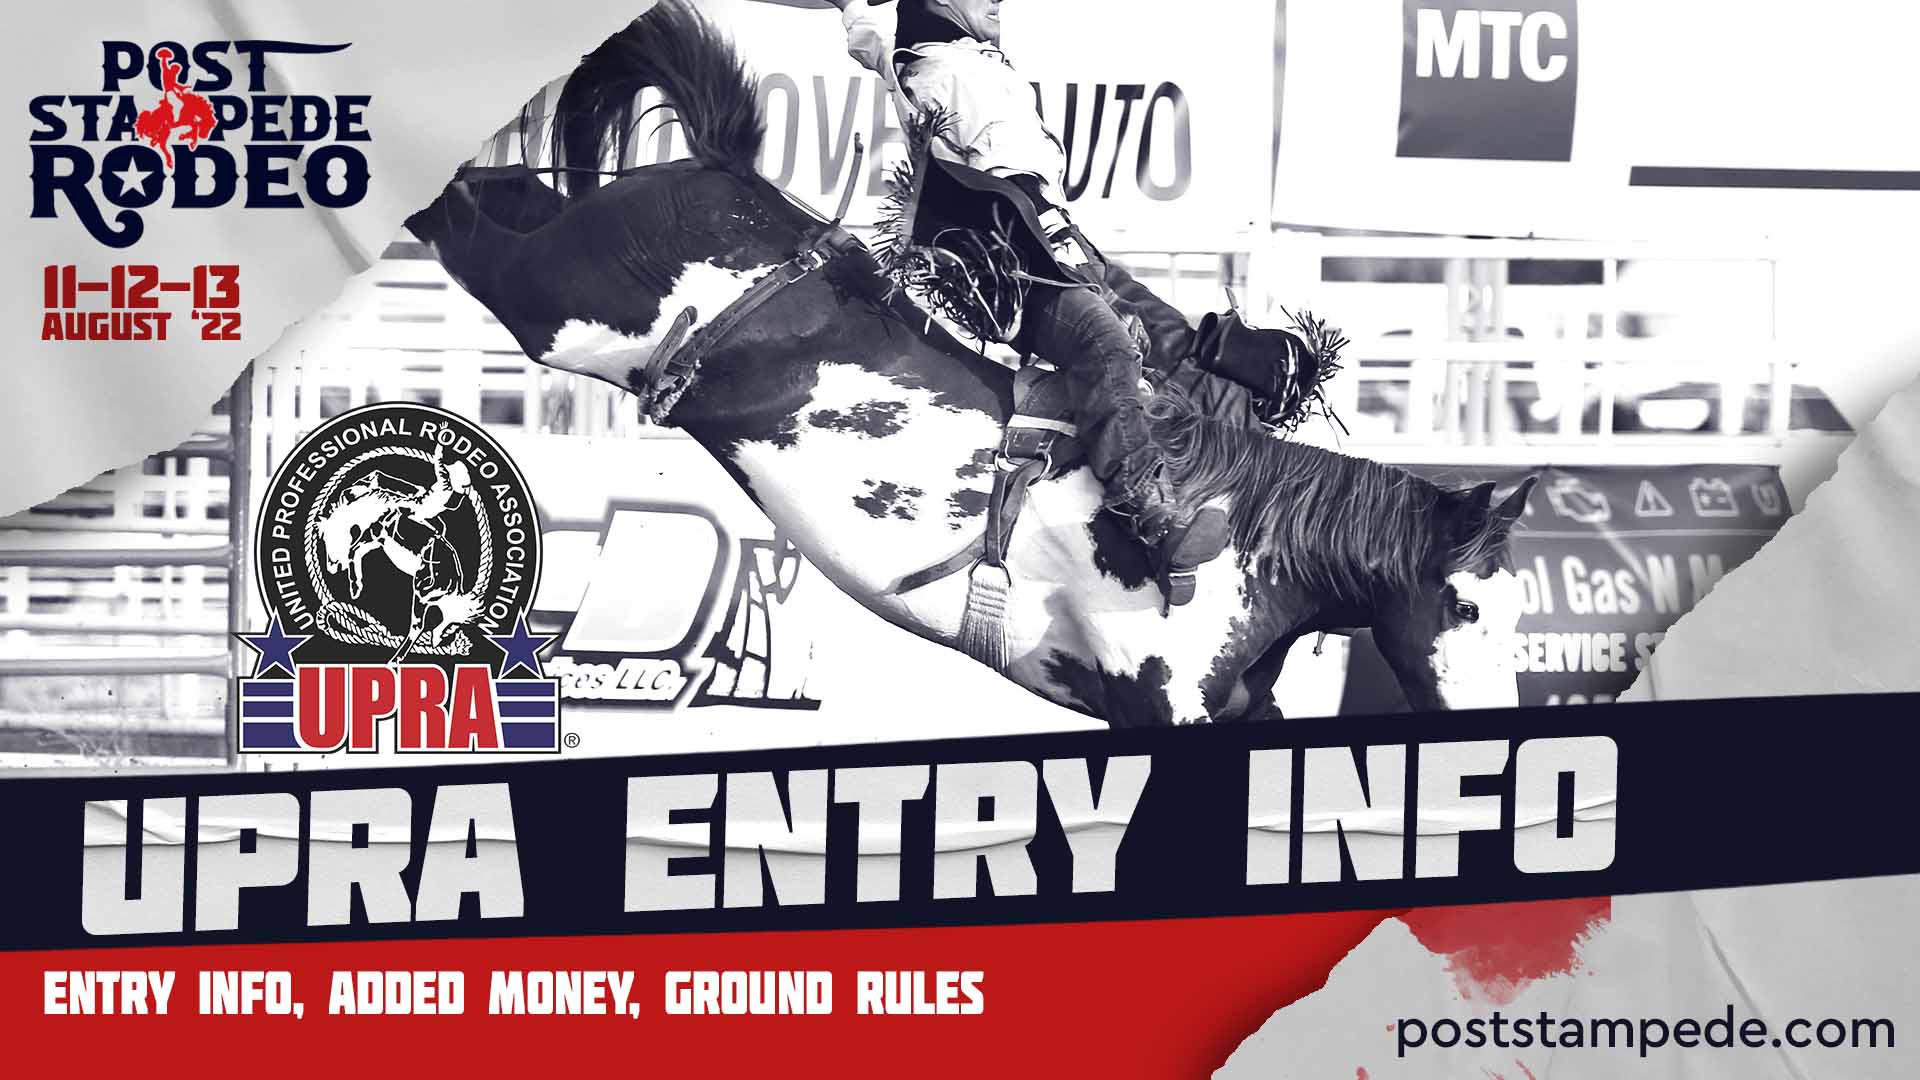 UPRA Rodeo Events Post Stampede